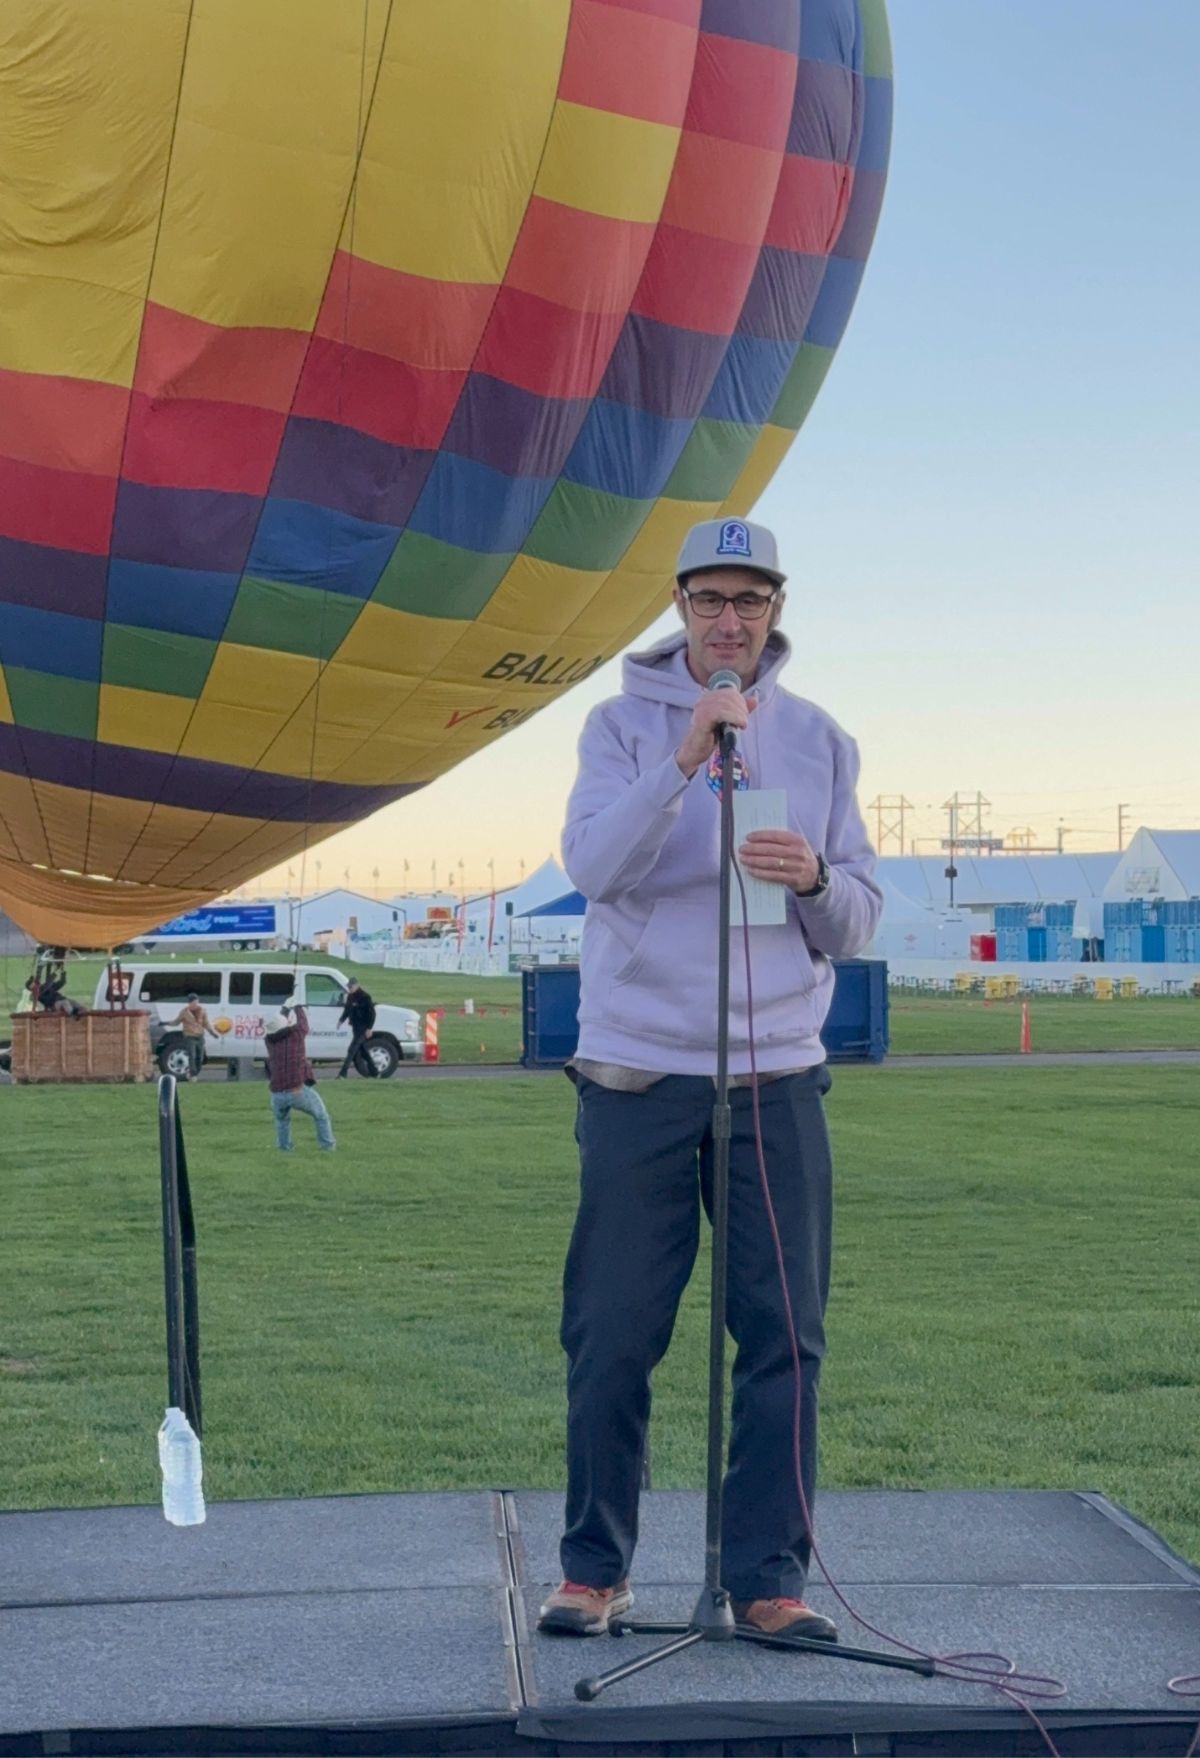 A man standing on a stage in front of a Meow Wolf Skyworm hot air balloon.